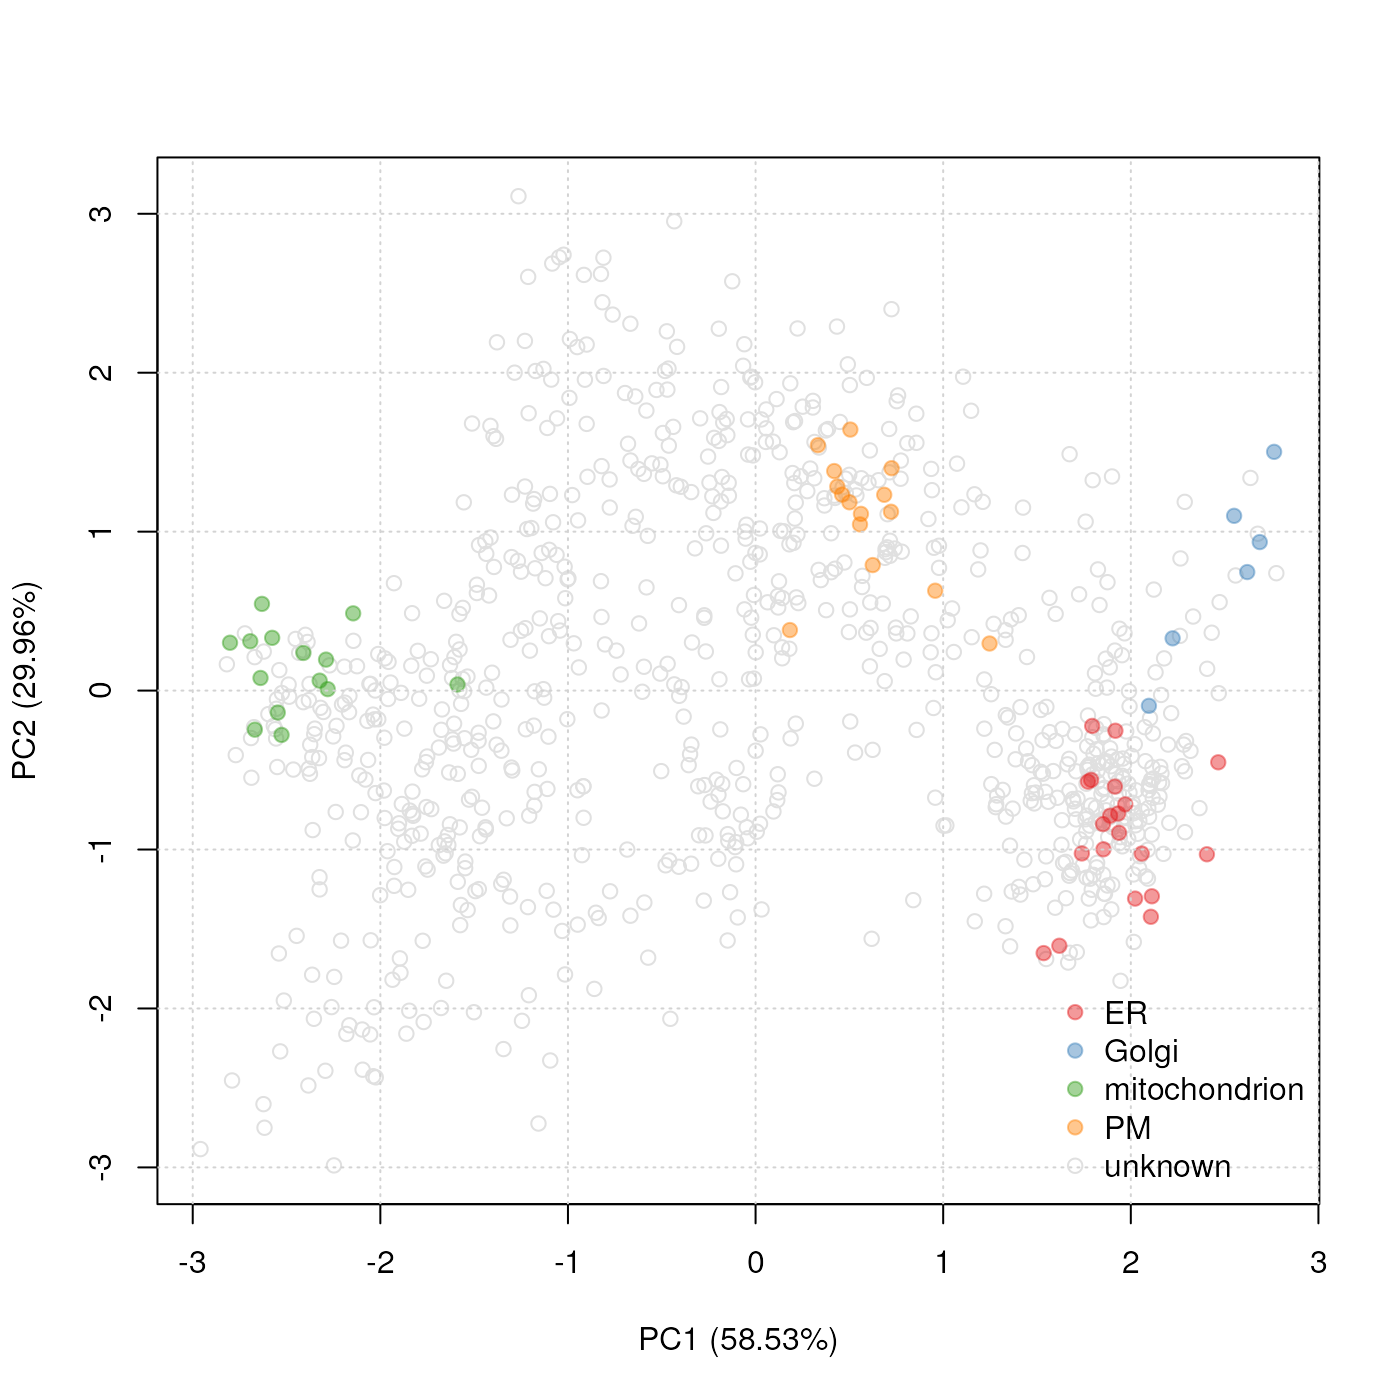 PCA plot. Reduced set of markers for the `tan2009r1` data projected onto 2 principal components.